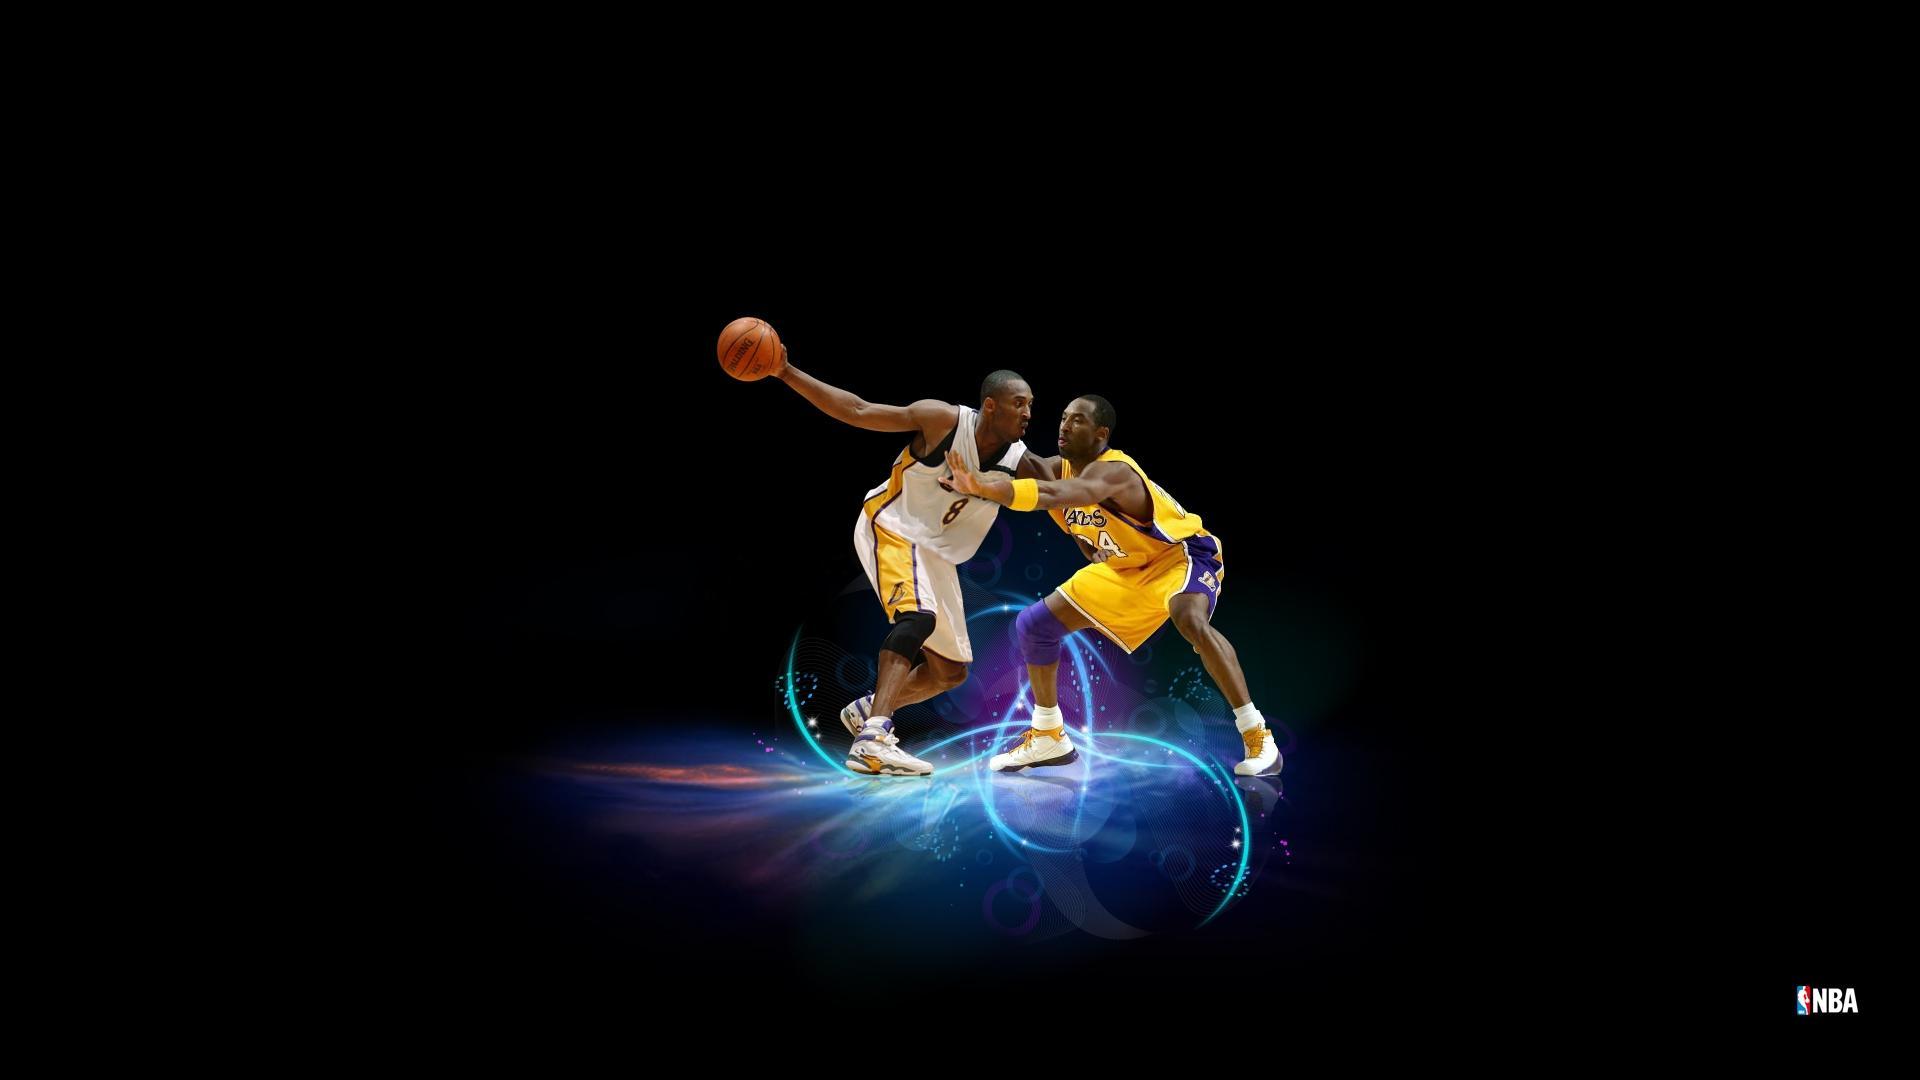 Best Nba Wallpaper, image collections of wallpaper